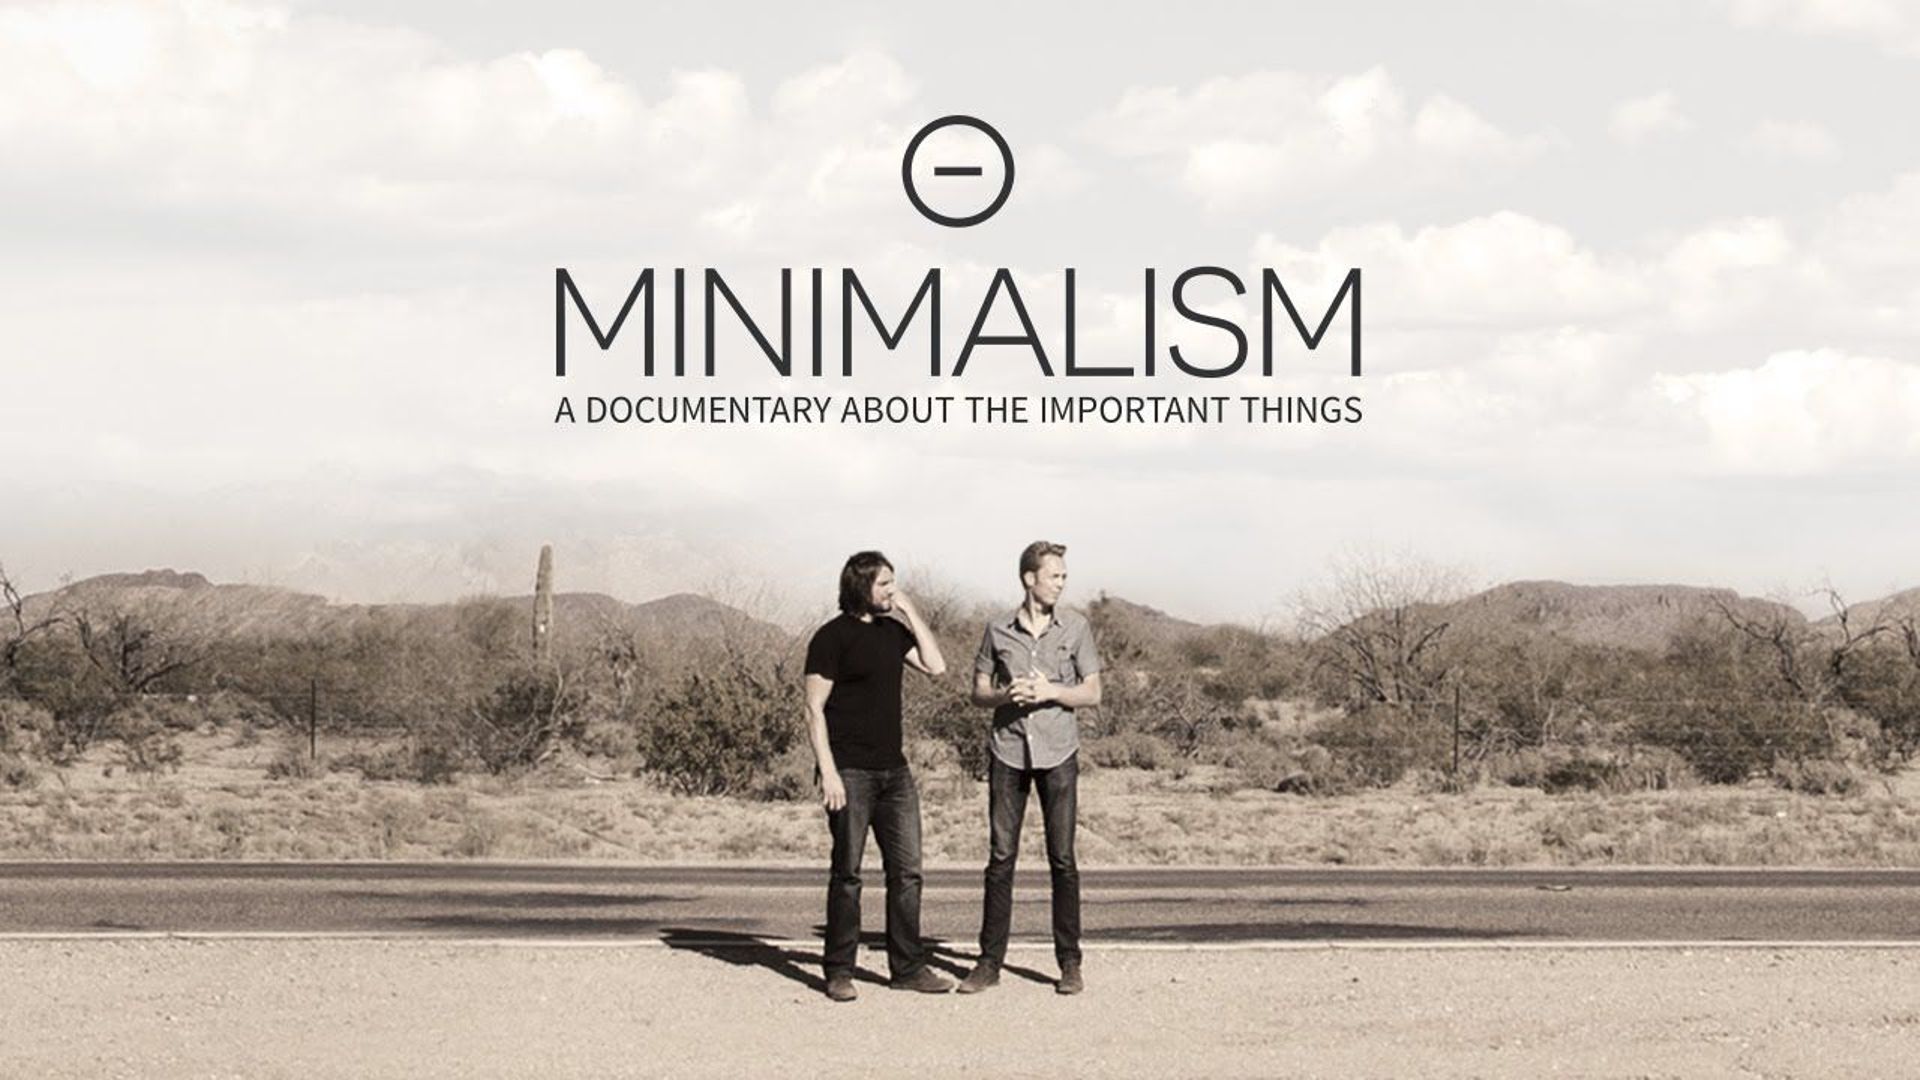 "Minimalism : a documentary about the important things"